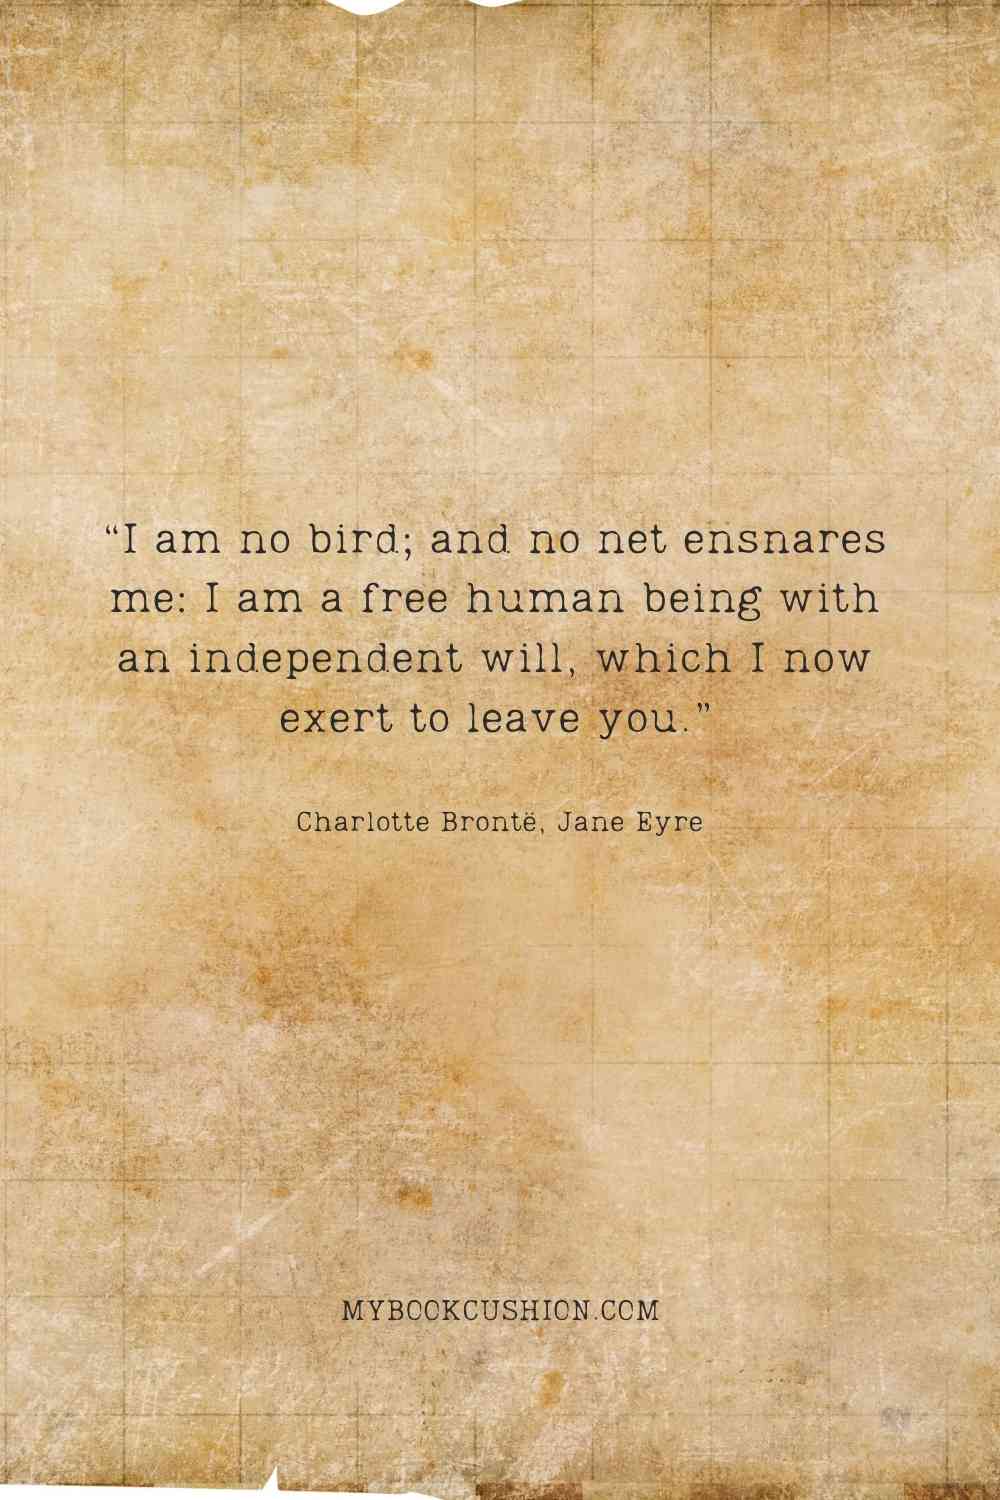 “I am no bird; and no net ensnares me_ I am a free human being with an independent will, which I now exert to leave you.” -  Charlotte Brontë, Jane Eyre